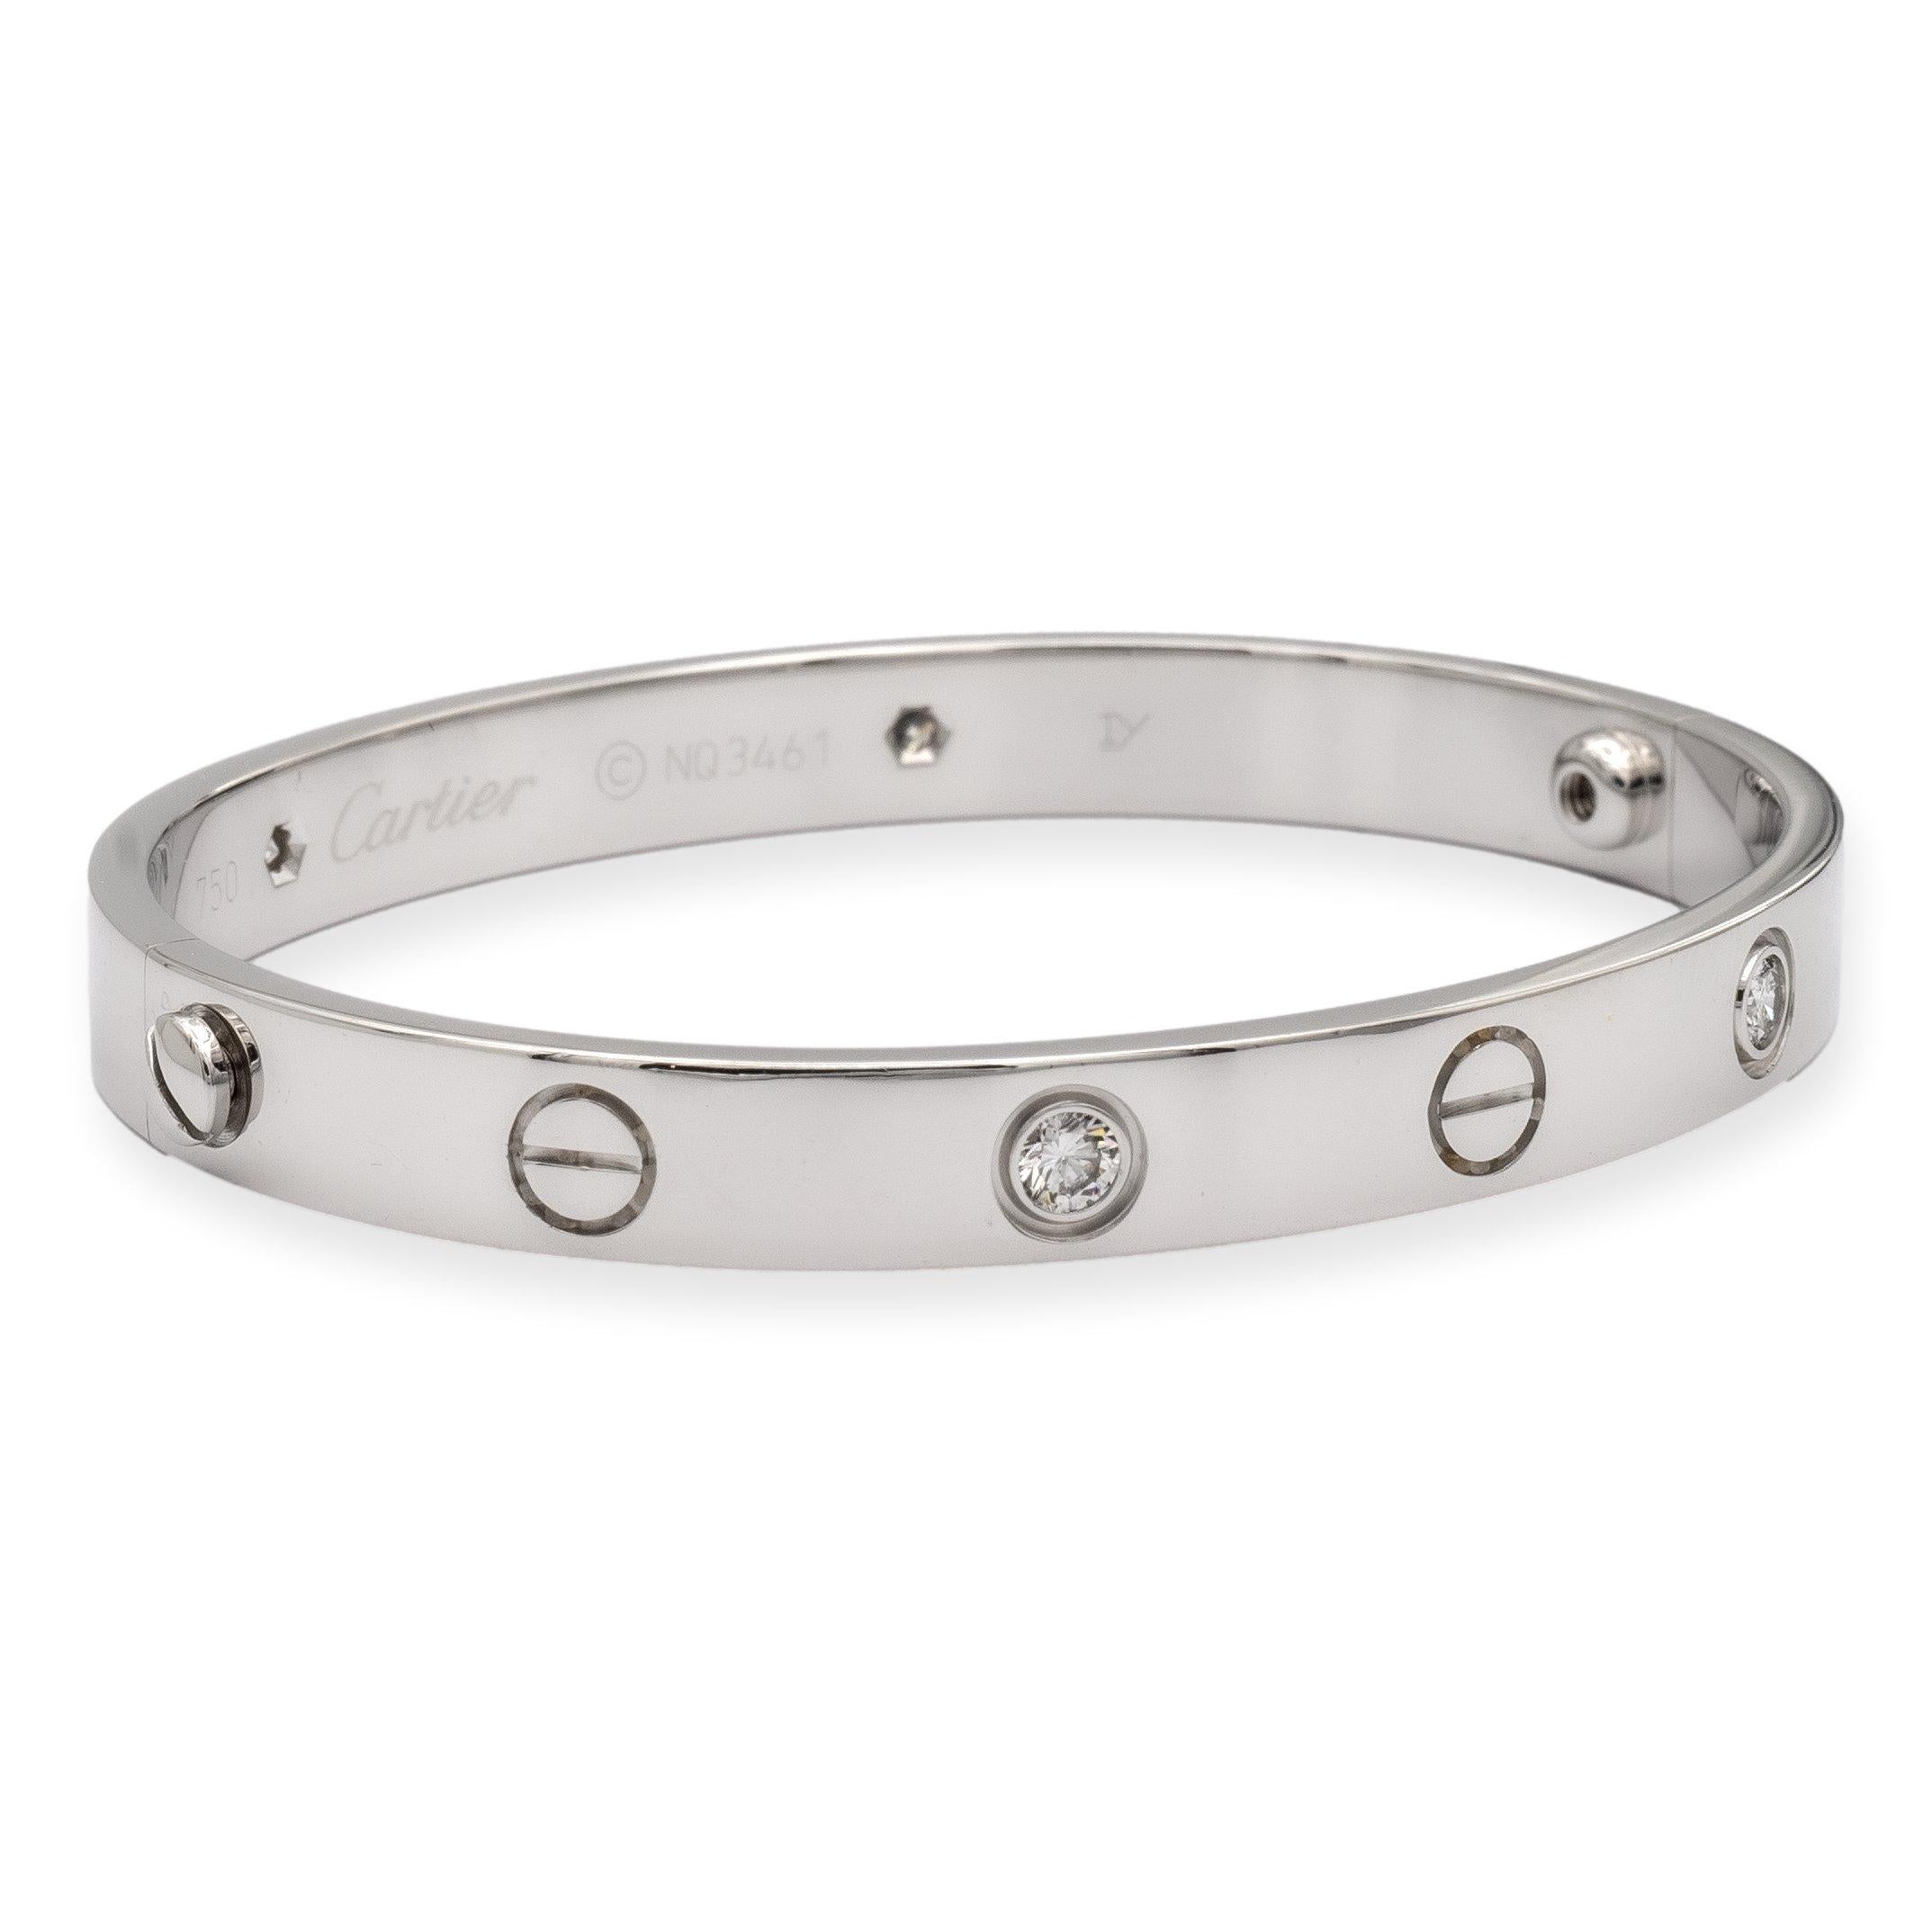 Cartier bangle bracelet from the iconic Love collection finely crafted in 18 karat white gold featuring 4 round brilliant cut diamonds weighing 0.42 cts. total weight. These diamonds are of exceptional quality, with a brilliant cut and excellent